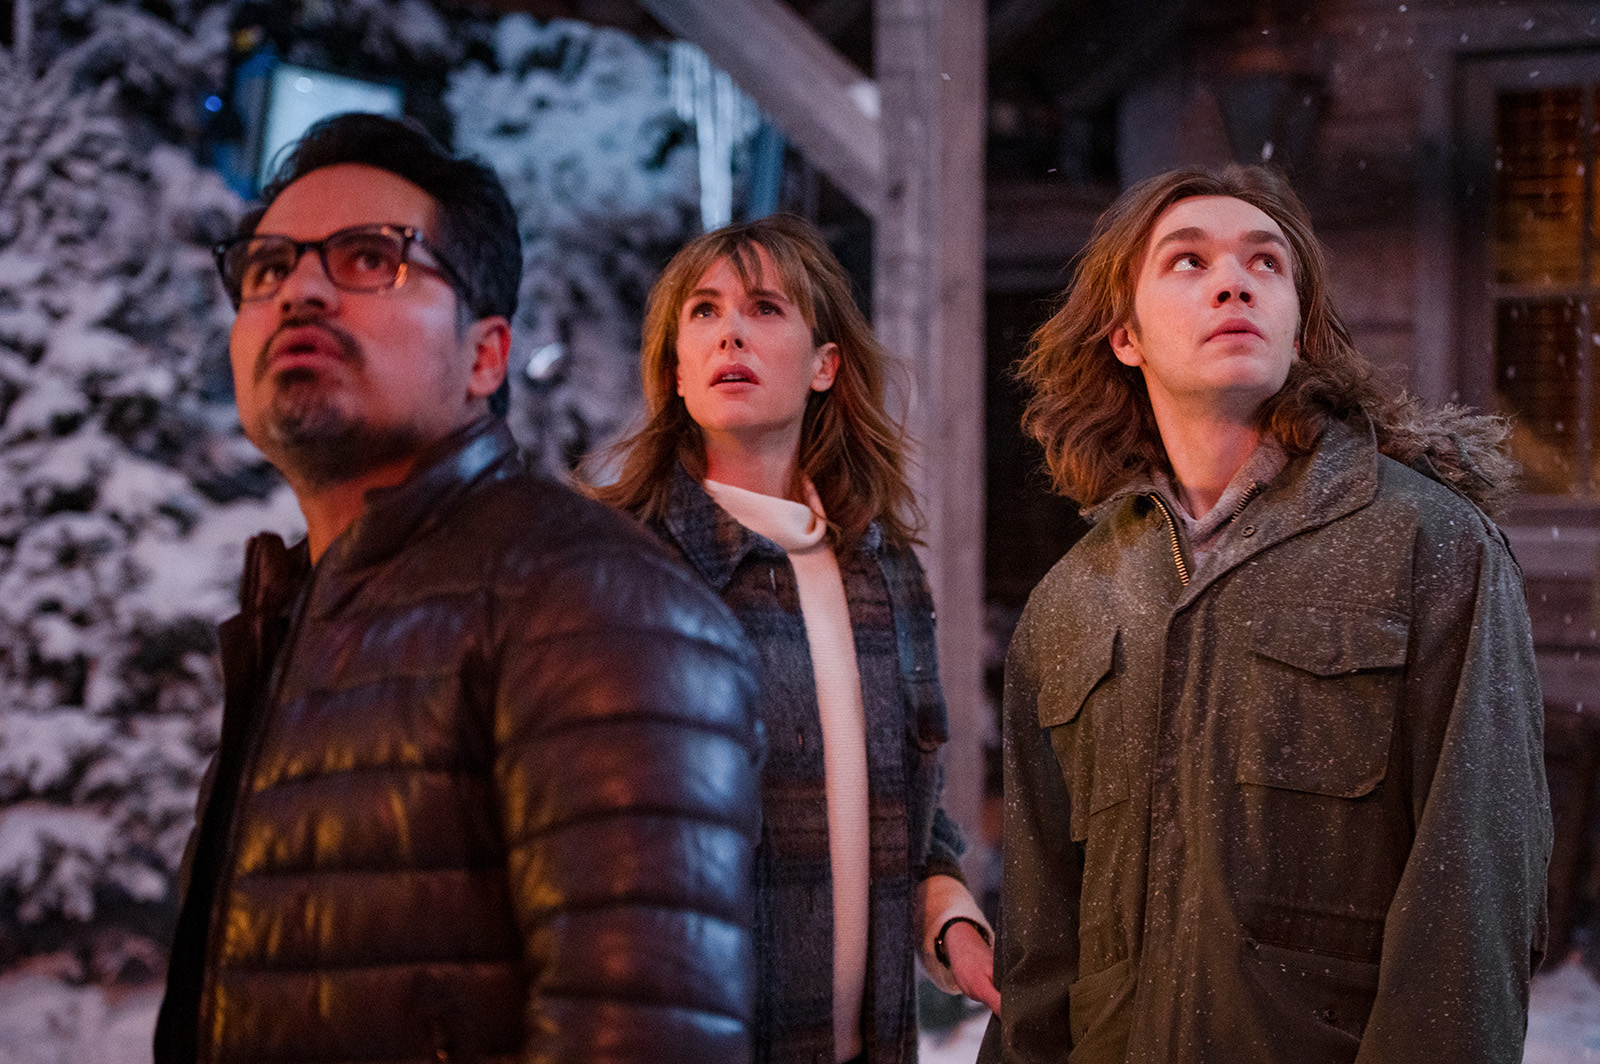 Tom and Brenda Lopez (played by Michael Pena and Carolina Bartczak) with Sonny Harper (Charlie Plummer). Image © Lionsgate Movies